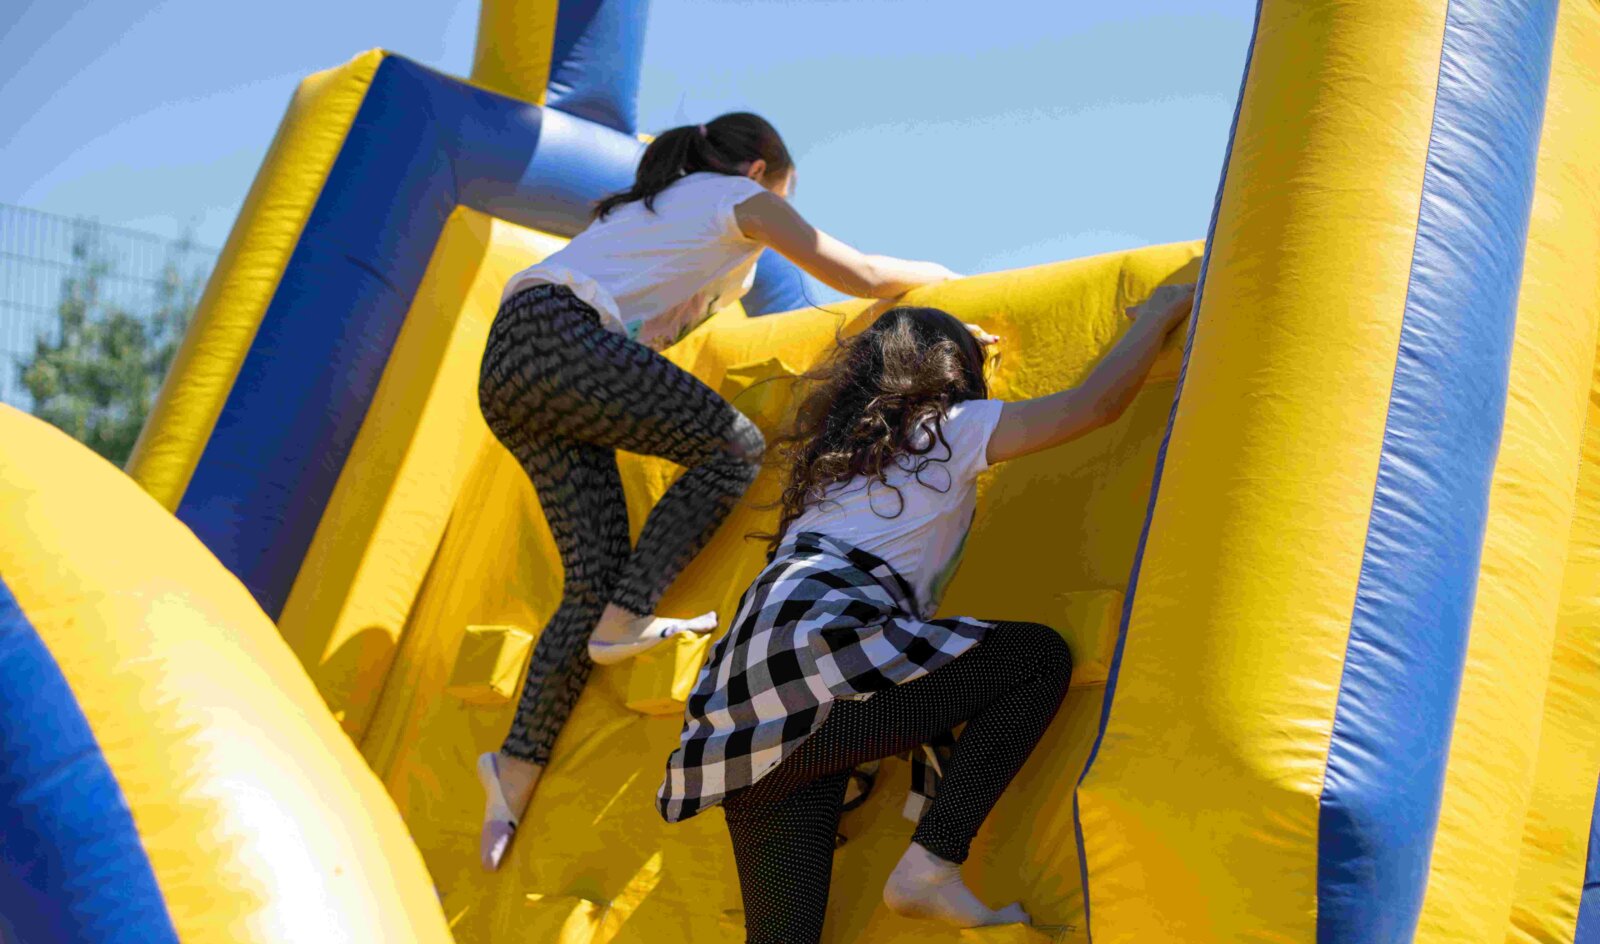 Two girls climbing over yellow and blue inflatable obstacle